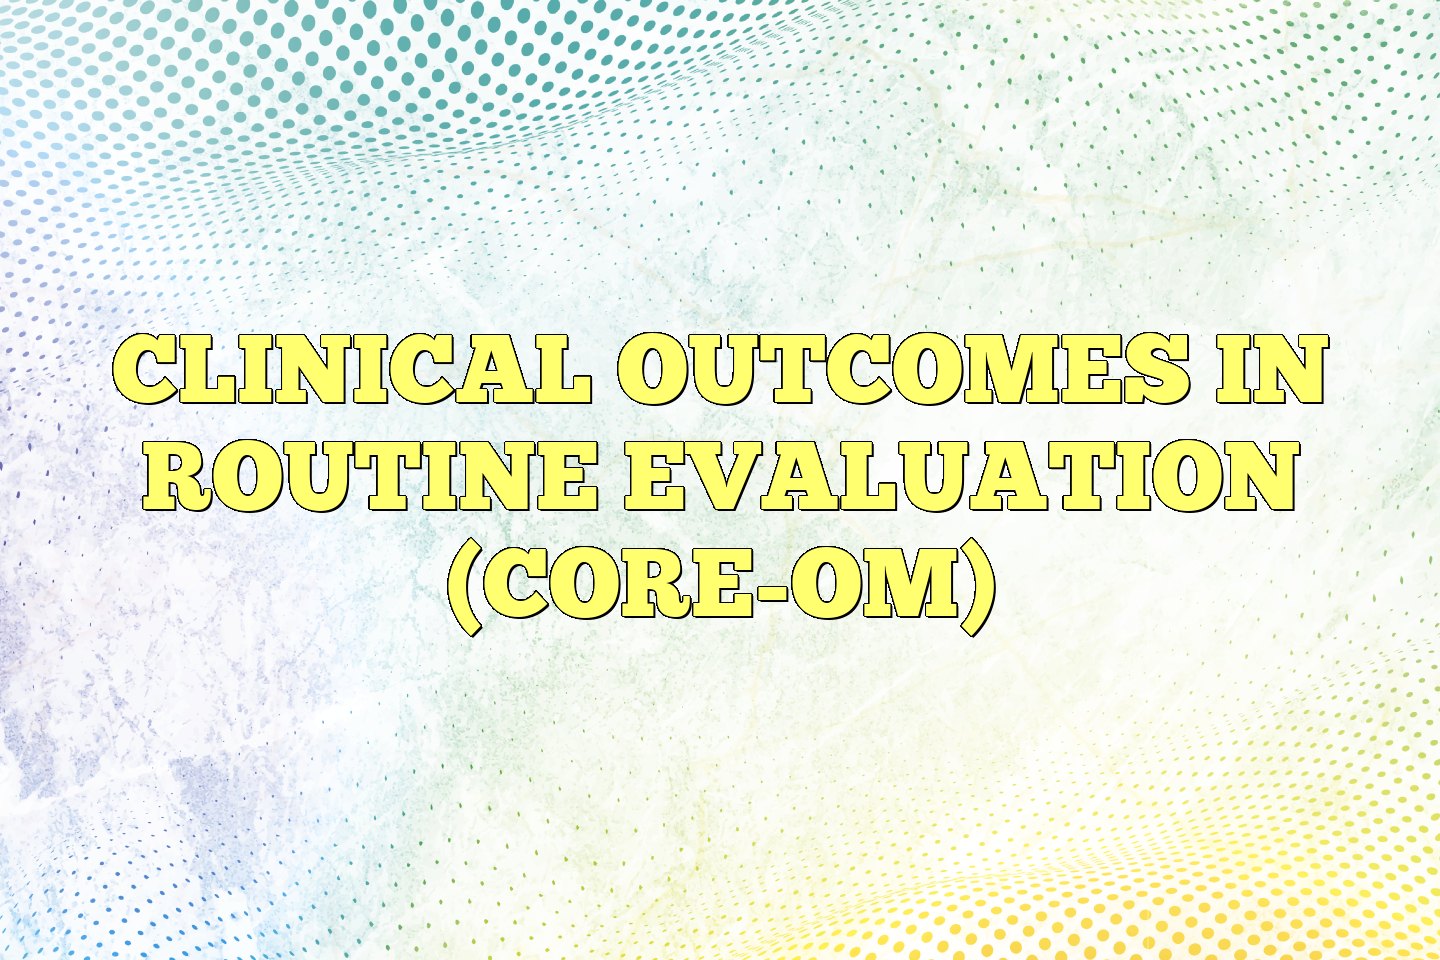 Clinical Outcomes In Routine Evaluation (CORE-OM)